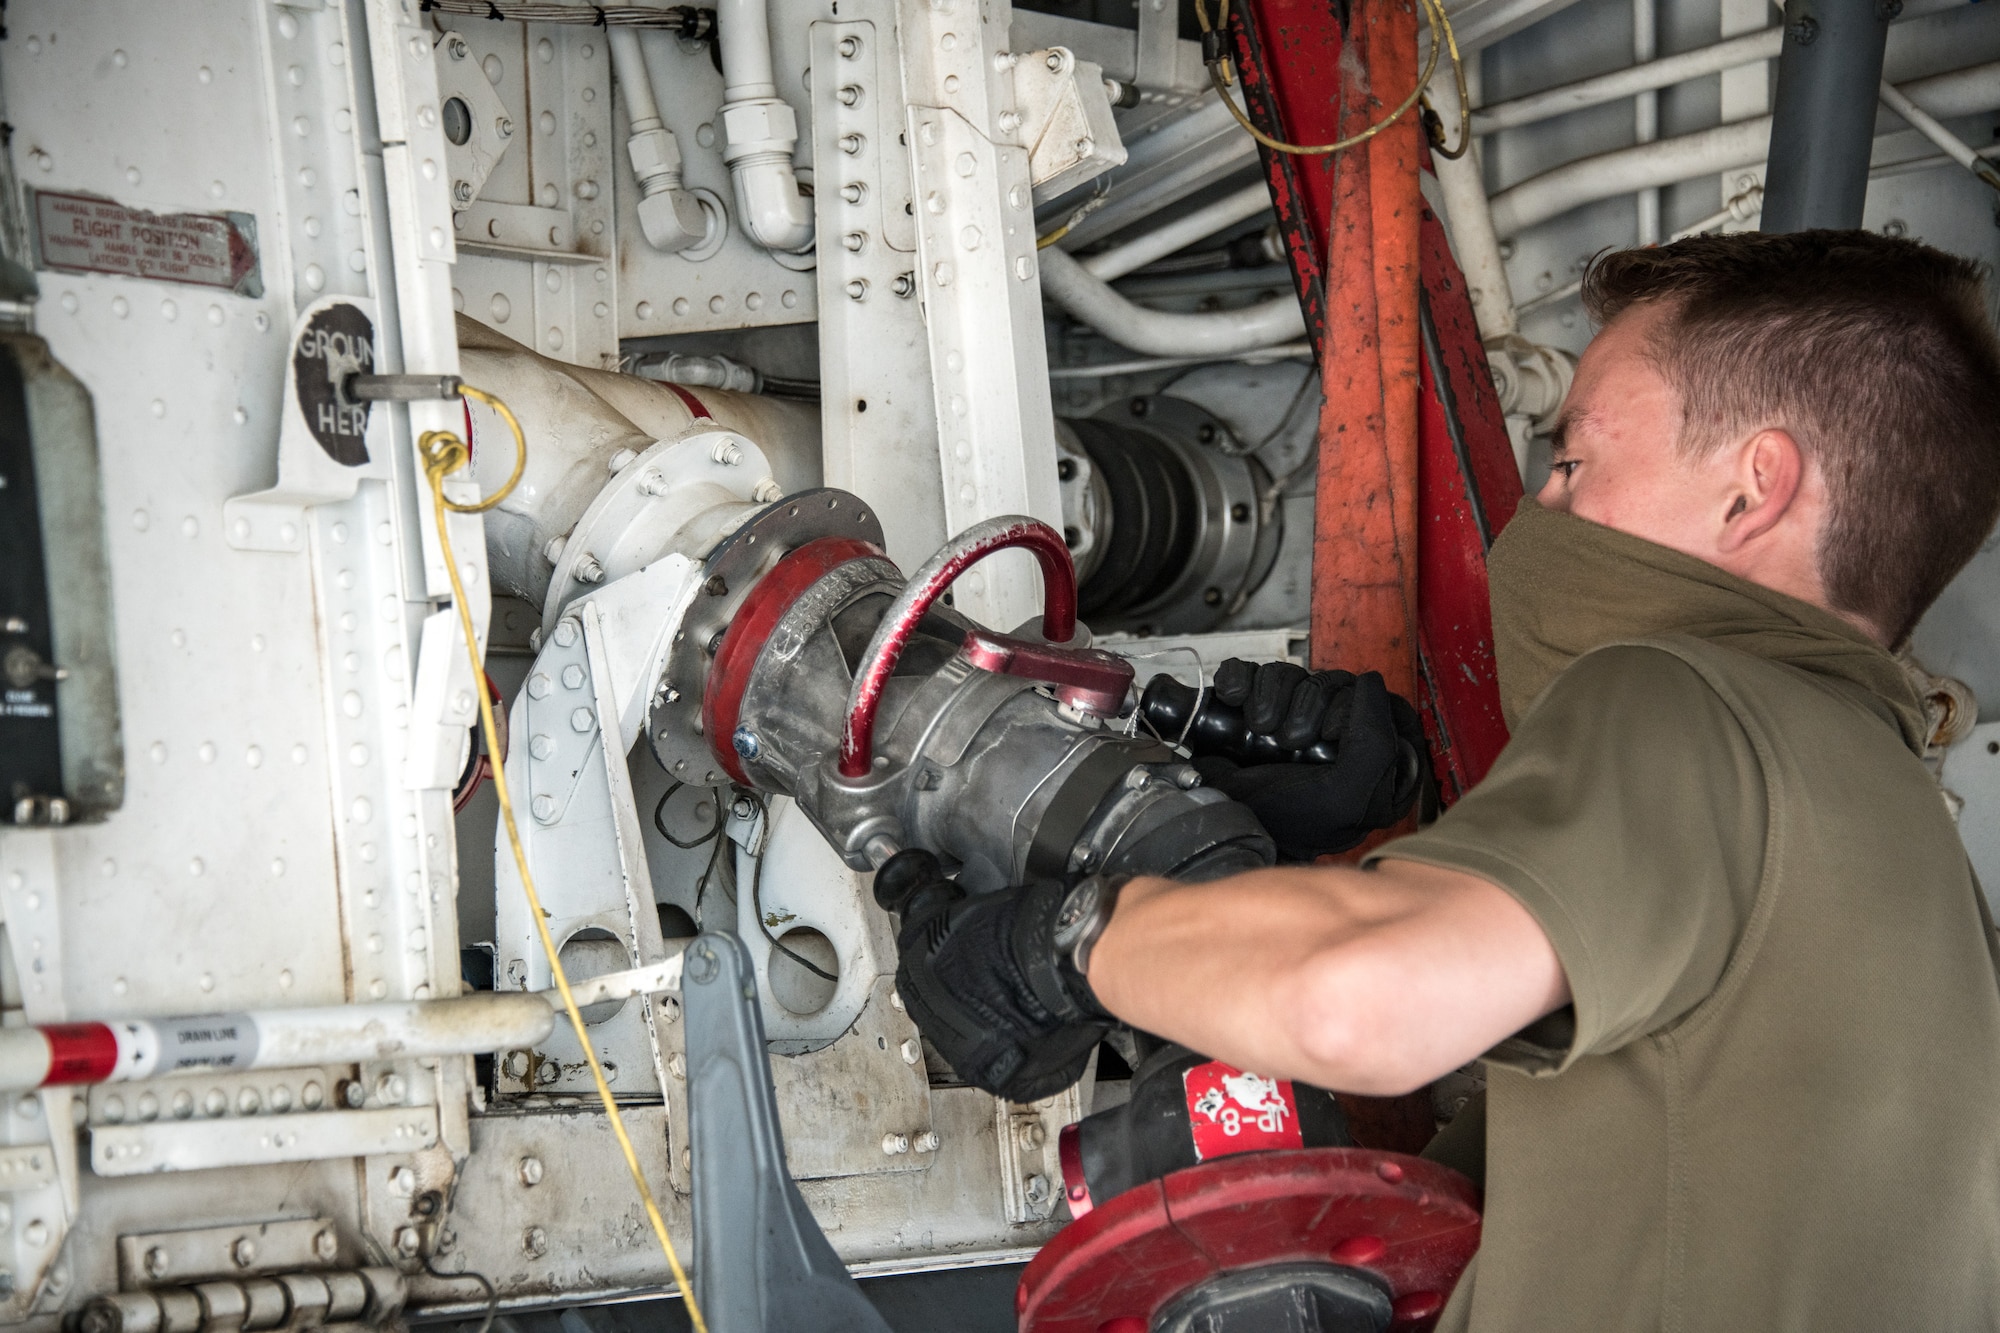 Royal Air Force member attaches fuel hose to aircraft